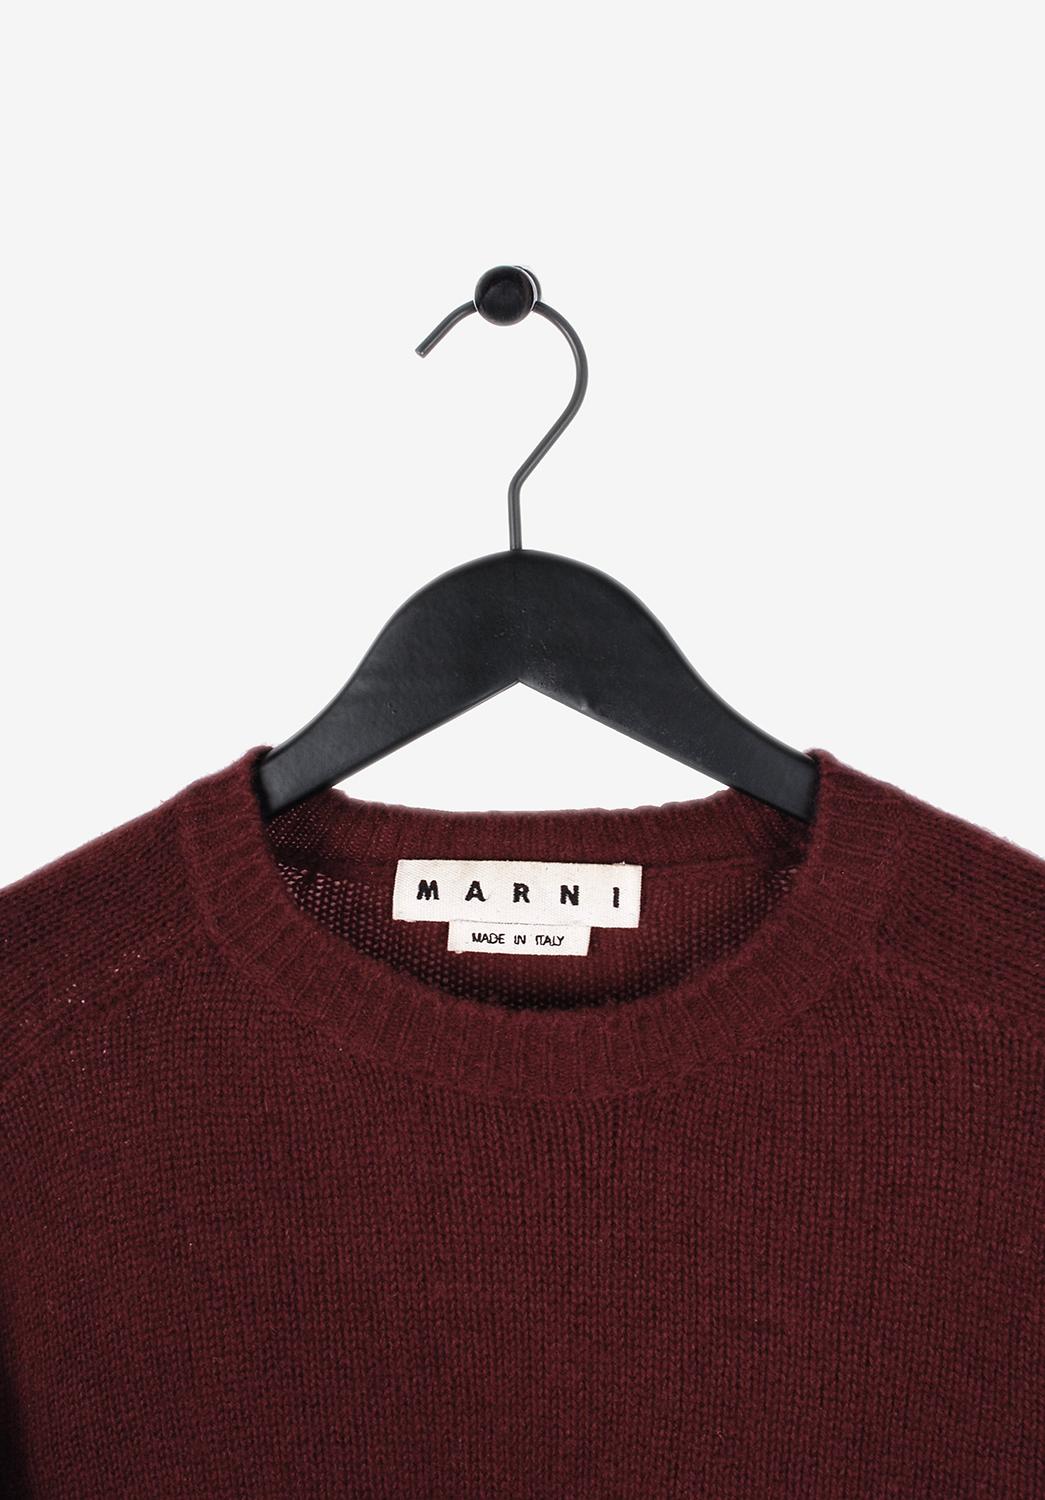 Item for sale is 100% genuine Marni Sweater S036
Color: Burgundy
(An actual color may a bit vary due to individual computer screen interpretation)
Material: 100% cashmere
Tag size: 46ITA (runs Medium) 
This sweater is great quality item. Rate 8.5 of